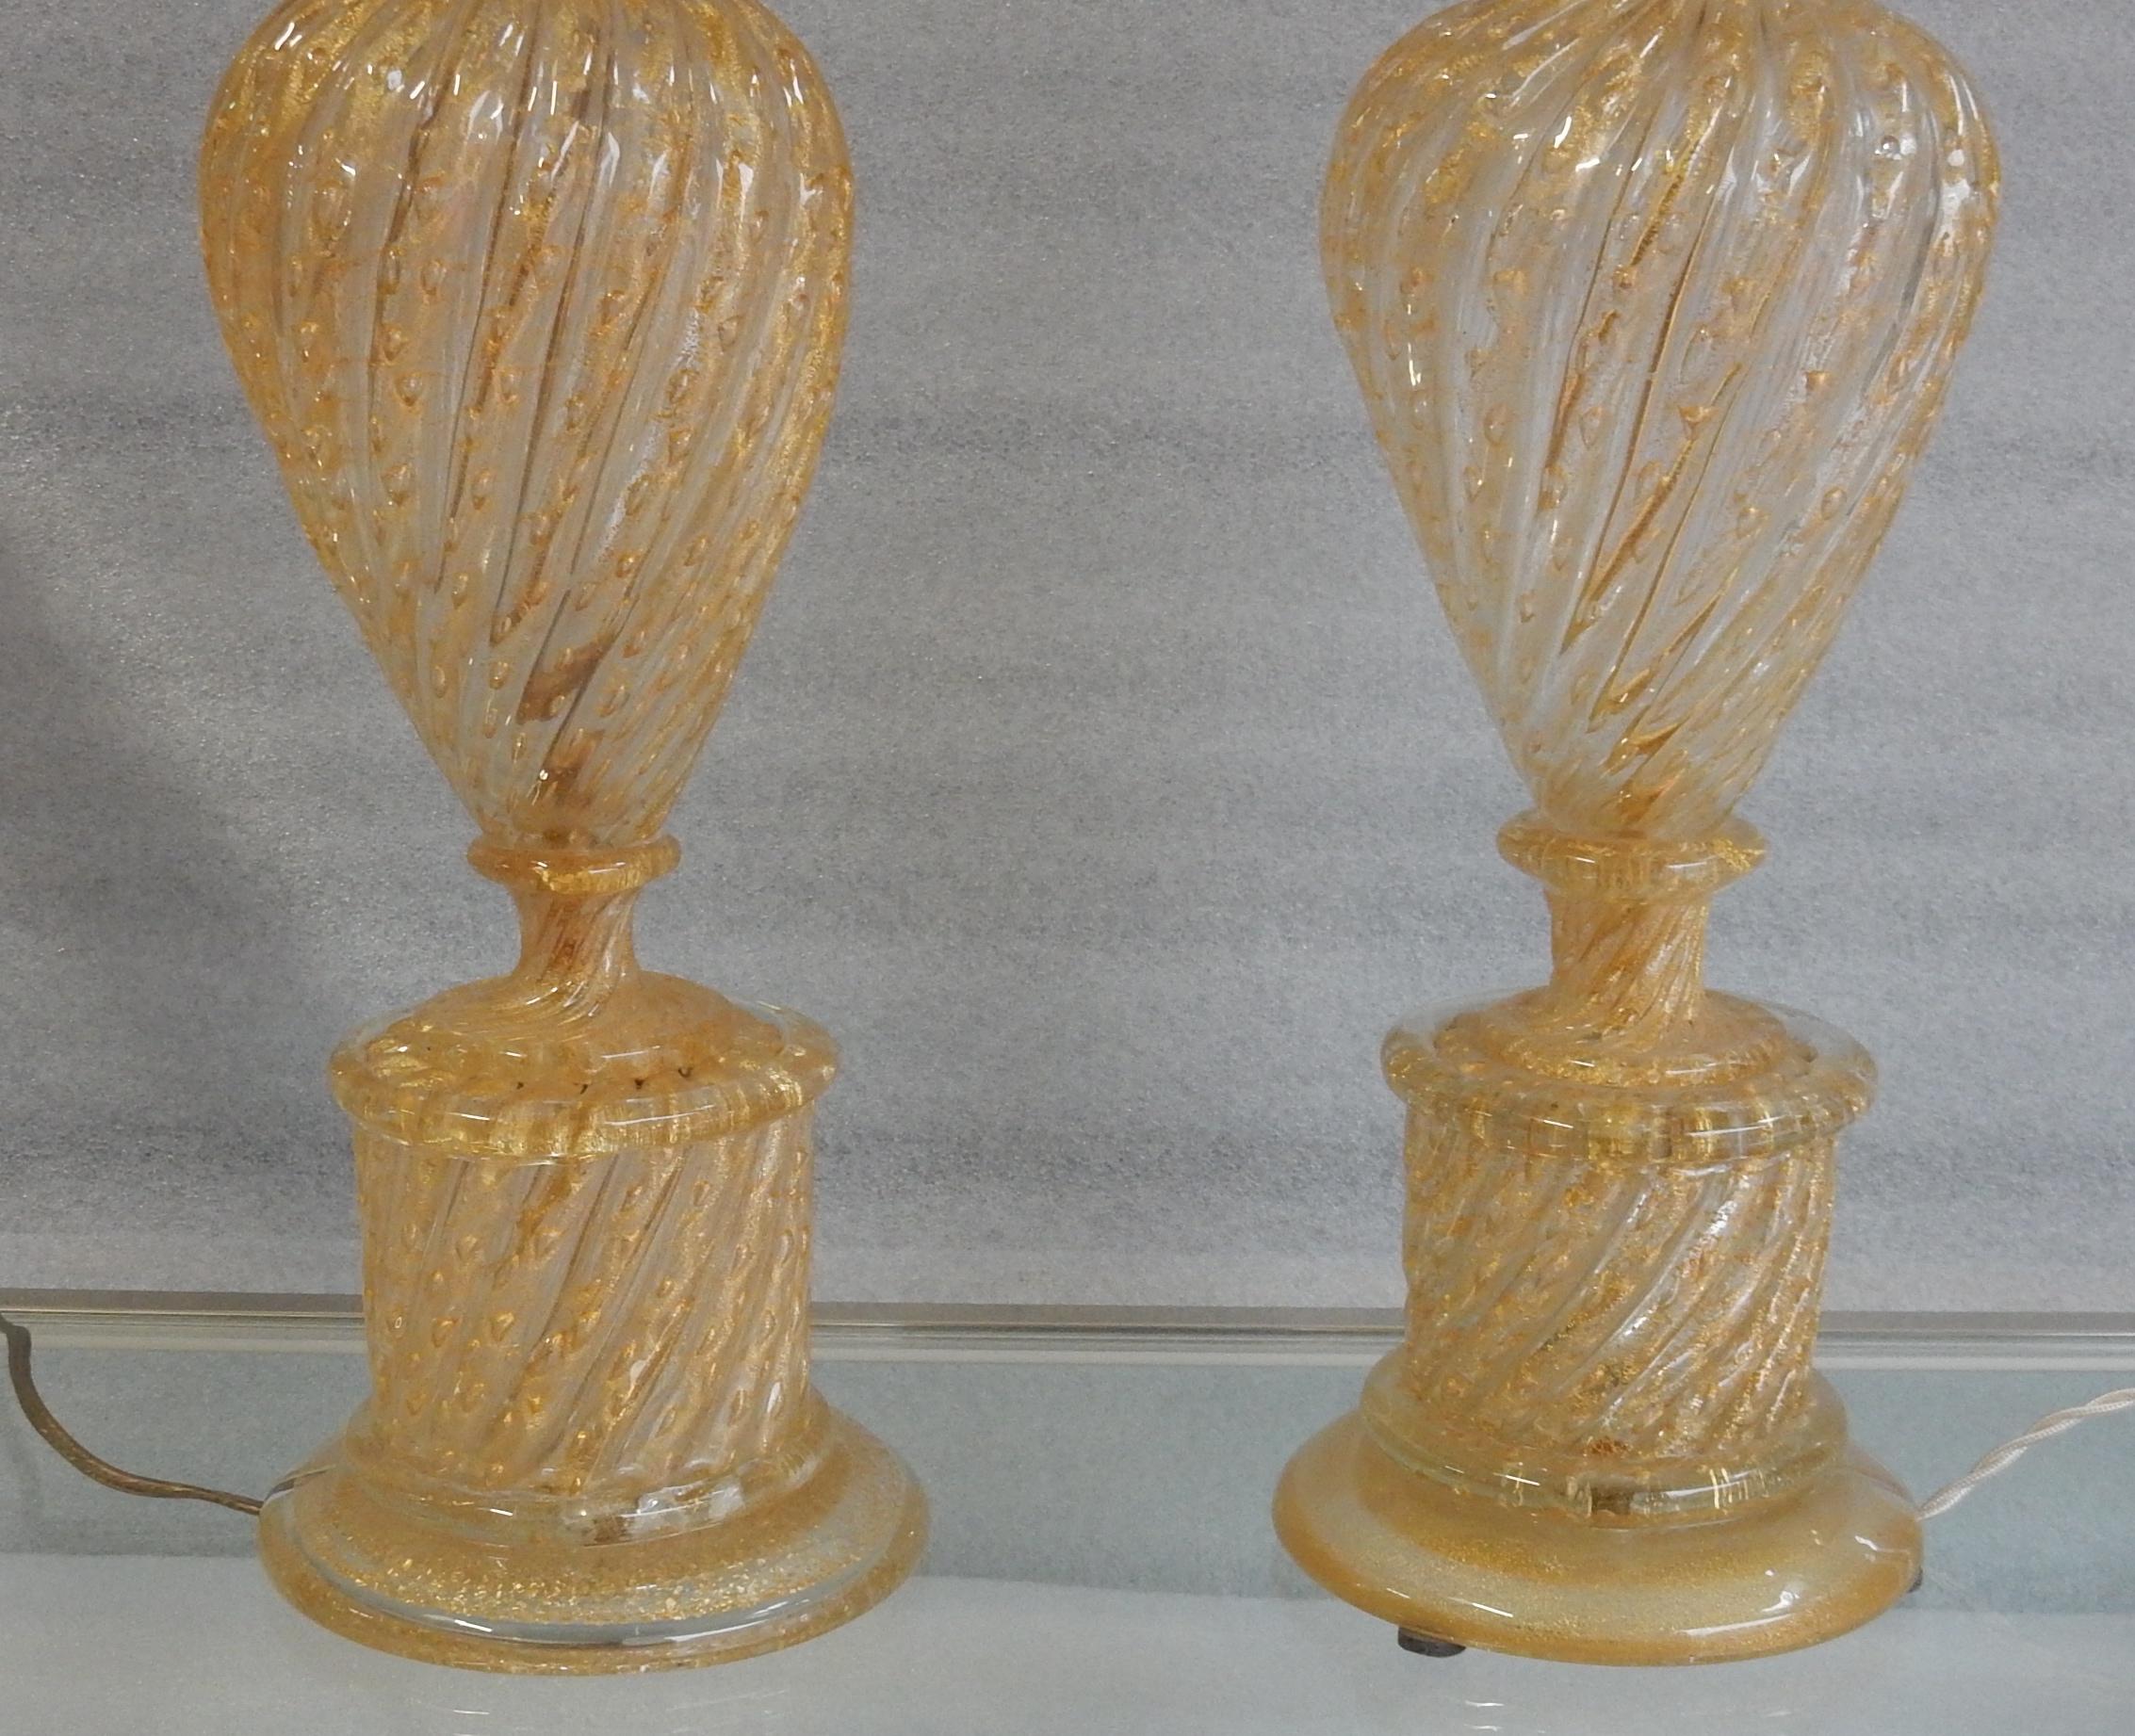 Pair of lamps or similar in Murano glass with gold spangles, one bulb, circa 1970, conical barrel, Good condition
Height of the glassware 43 cm without socket

Base diameter 16 cm
Diameter 15 cm.